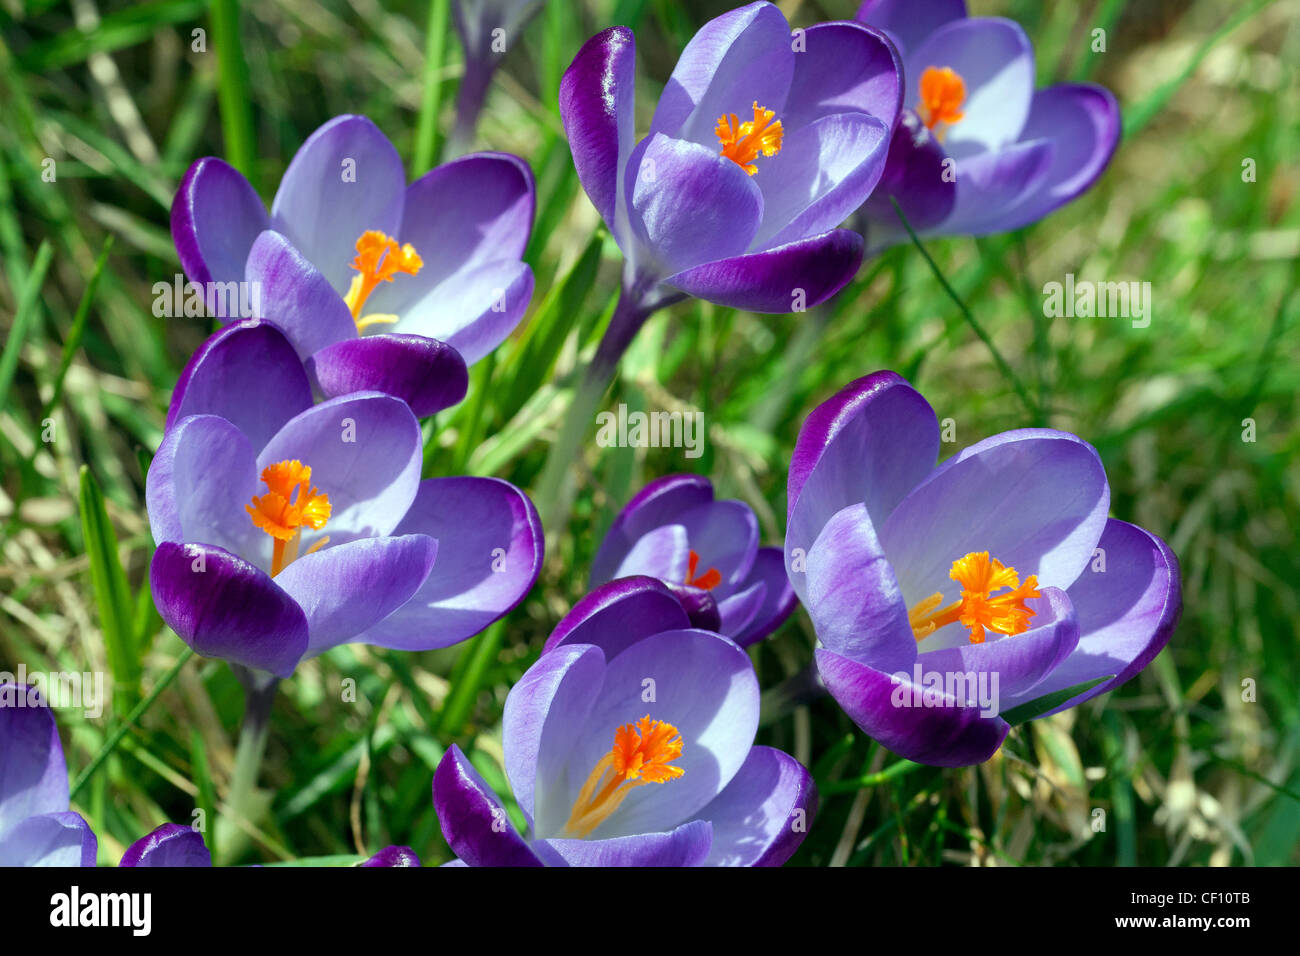 Bright purple crocus flowers with vivid orange stamens opening up in the spring sunshine. Happy faces. Stock Photo